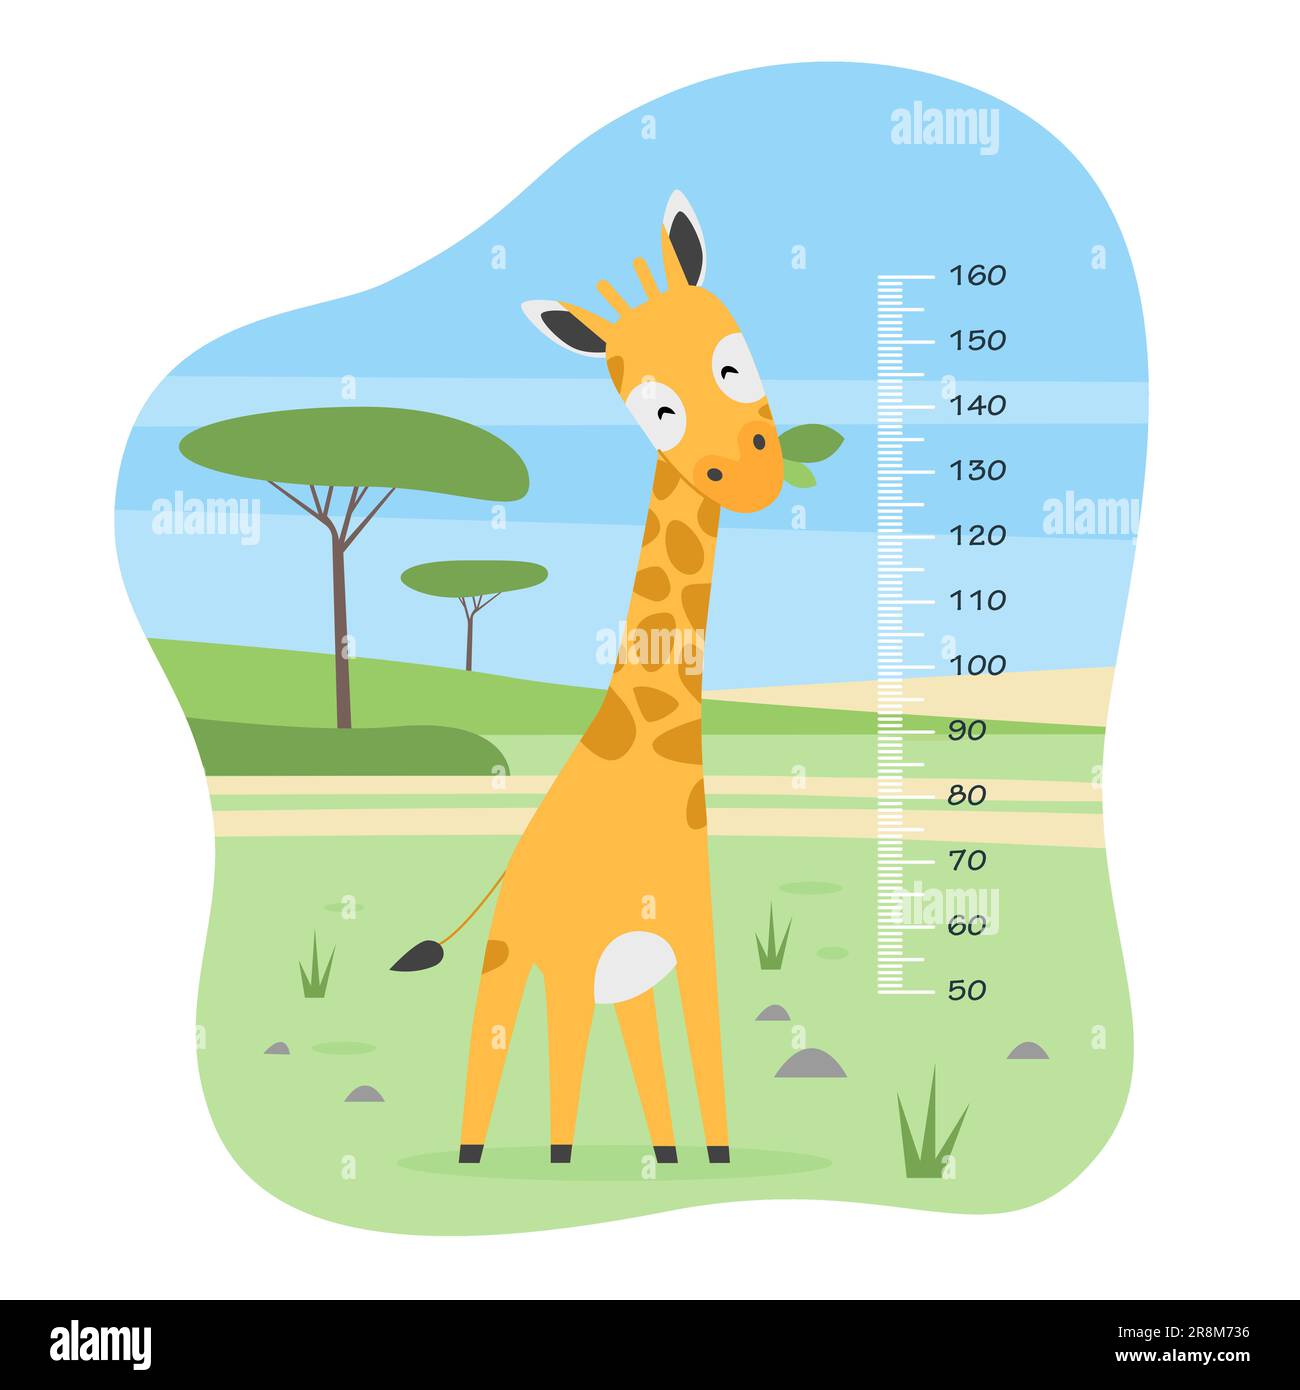 https://c8.alamy.com/comp/2R8M736/kids-height-chart-with-cute-giraffe-vector-illustration-cartoon-african-animal-with-long-neck-and-ruler-to-measure-height-of-preschool-child-stadiometer-with-millimeter-scale-for-kindergartens-wall-2R8M736.jpg